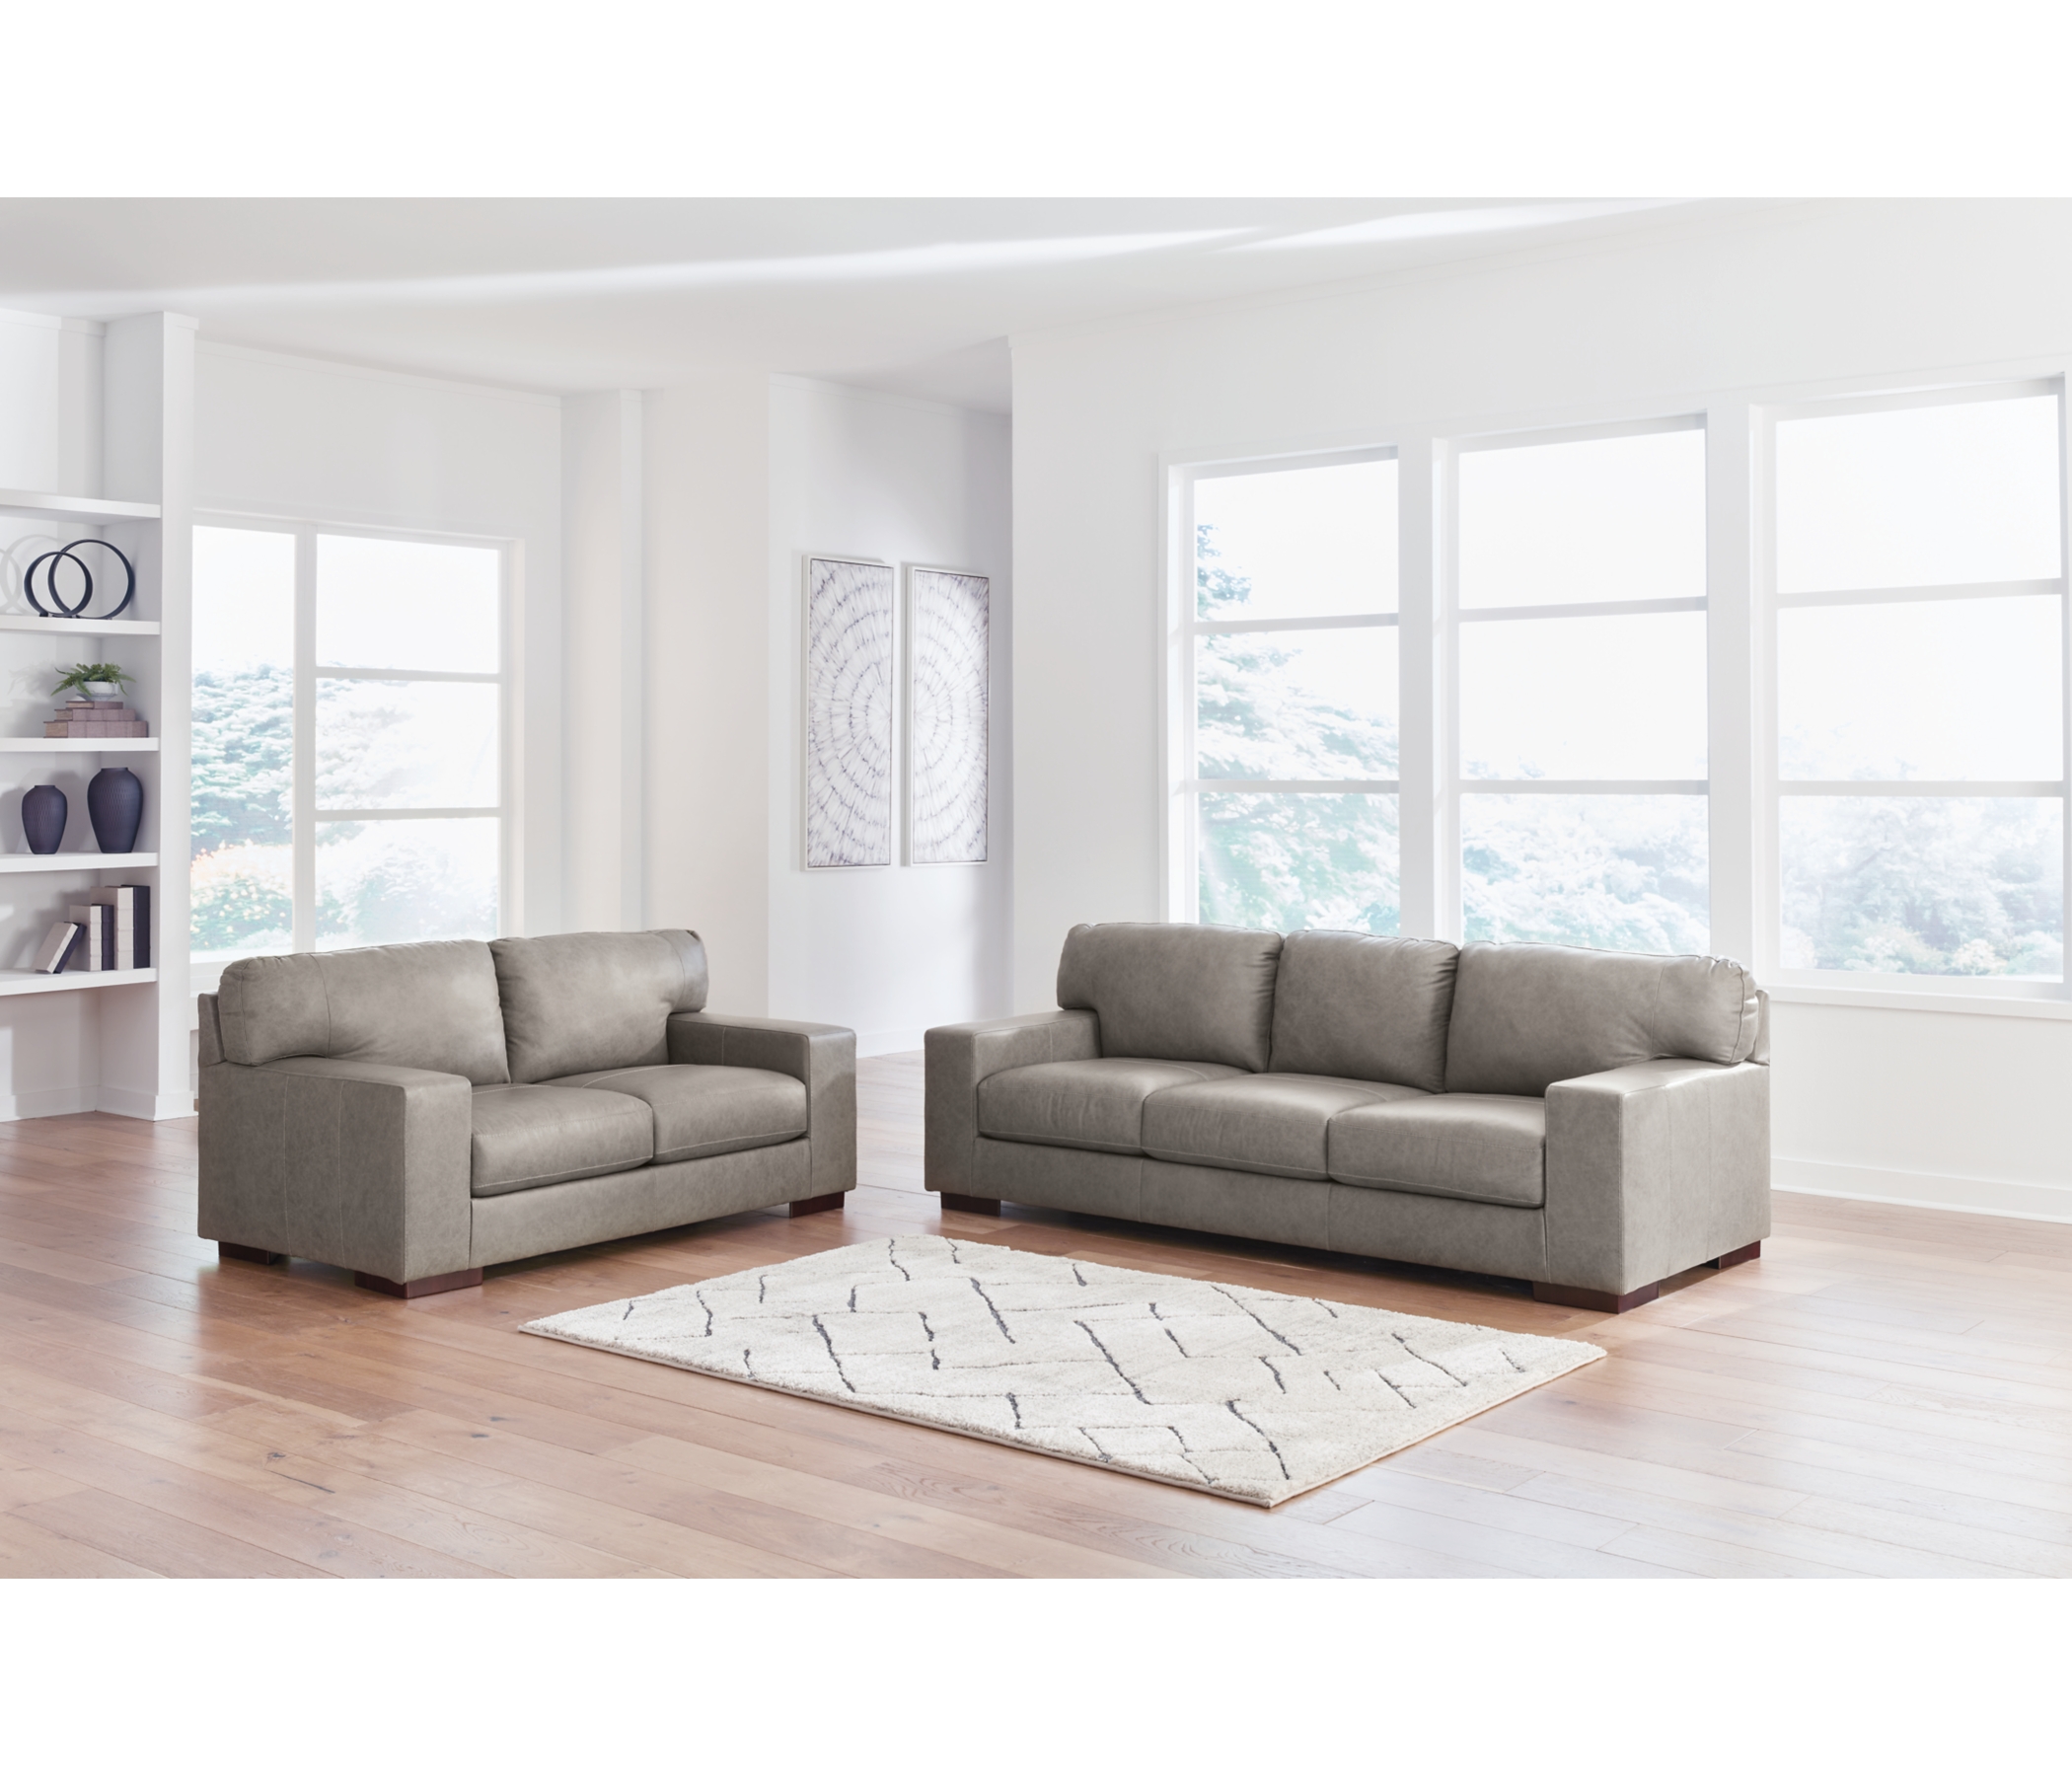 Lombardia Sofa and Loveseat, Fossil, large